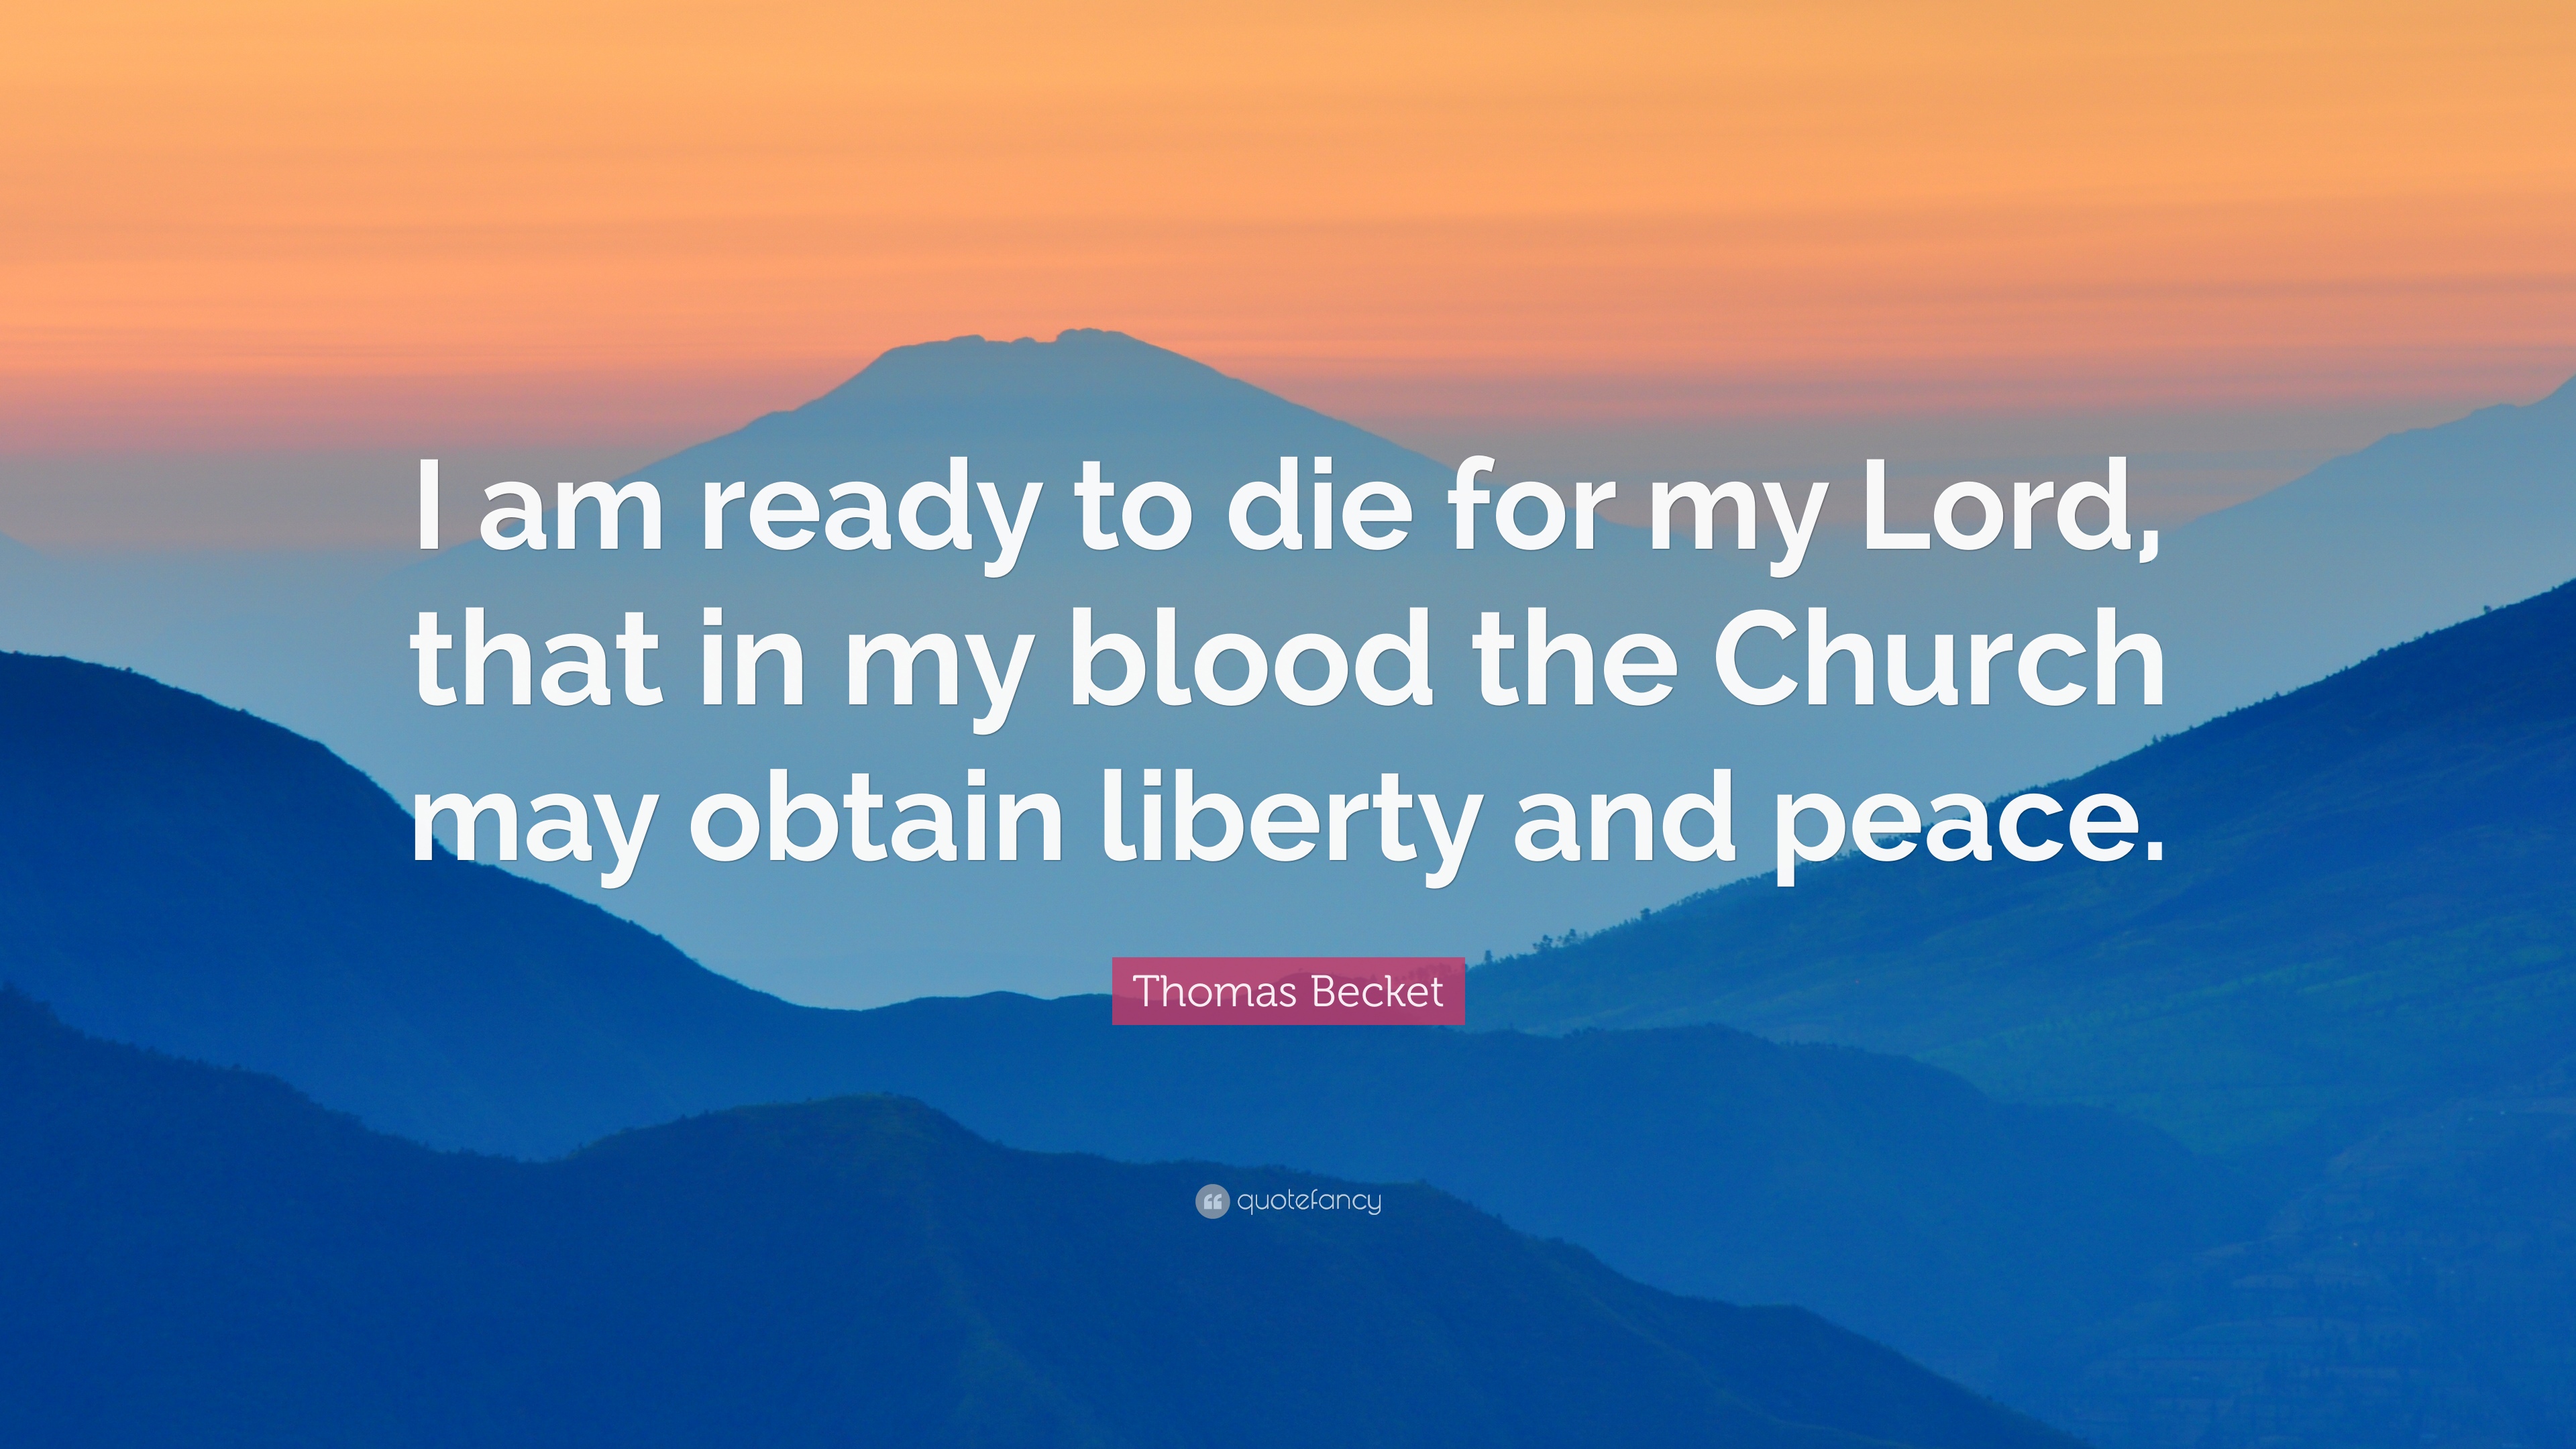 Thomas Becket Quote: “I am ready to die for my Lord, that in my ...